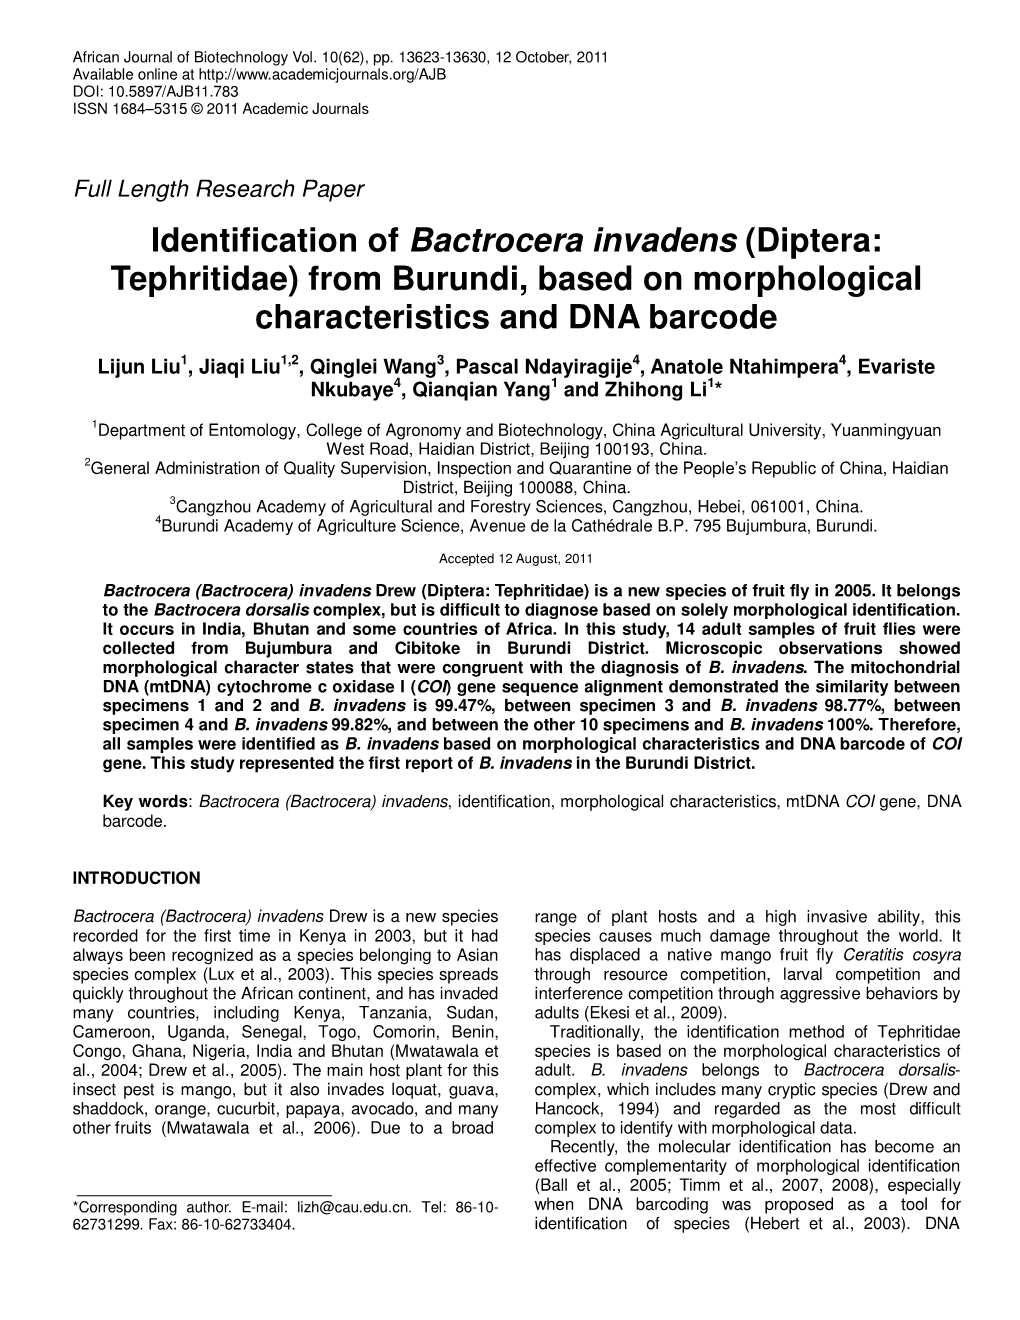 Identification of Bactrocera Invadens (Diptera: Tephritidae) from Burundi, Based on Morphological Characteristics and DNA Barcode